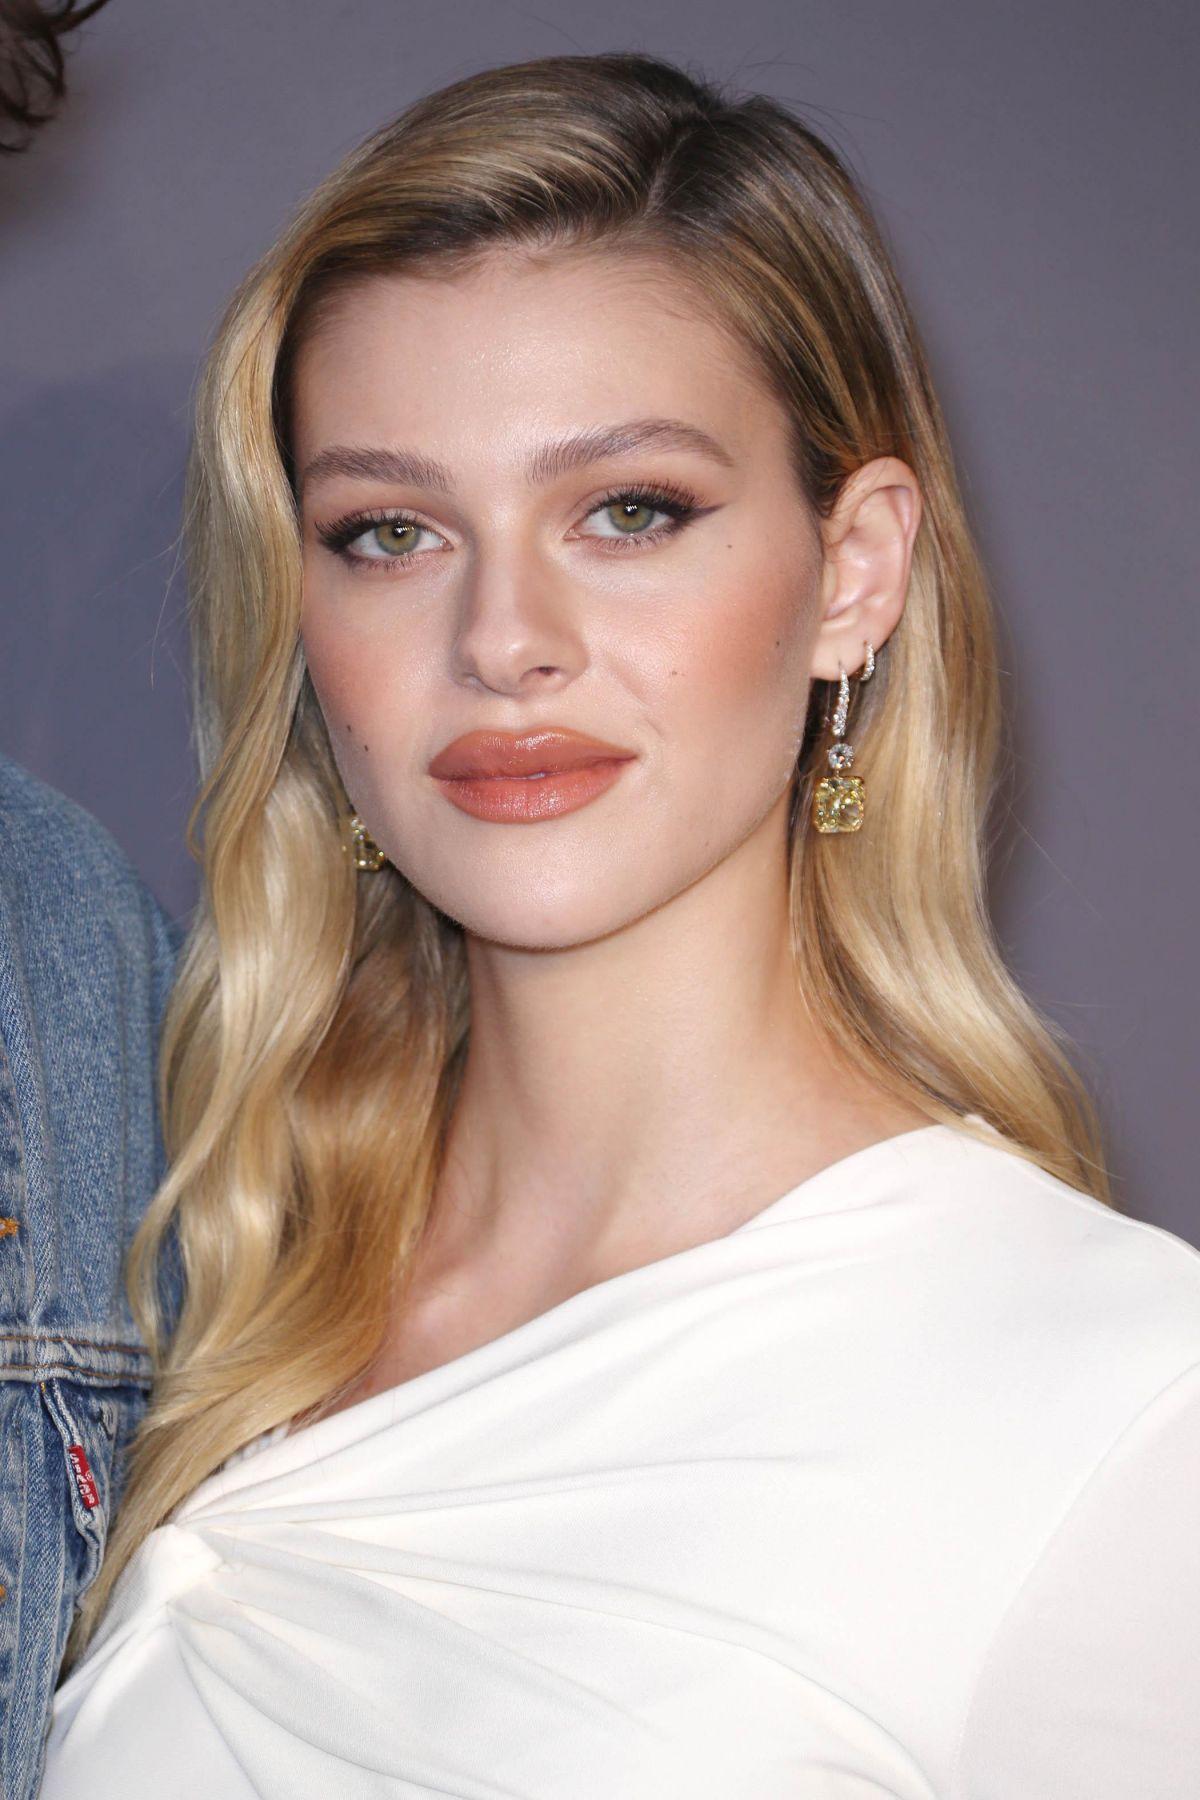 55 Hot Pictures Of Nicola Peltz Will Drive You Insane For Her 3